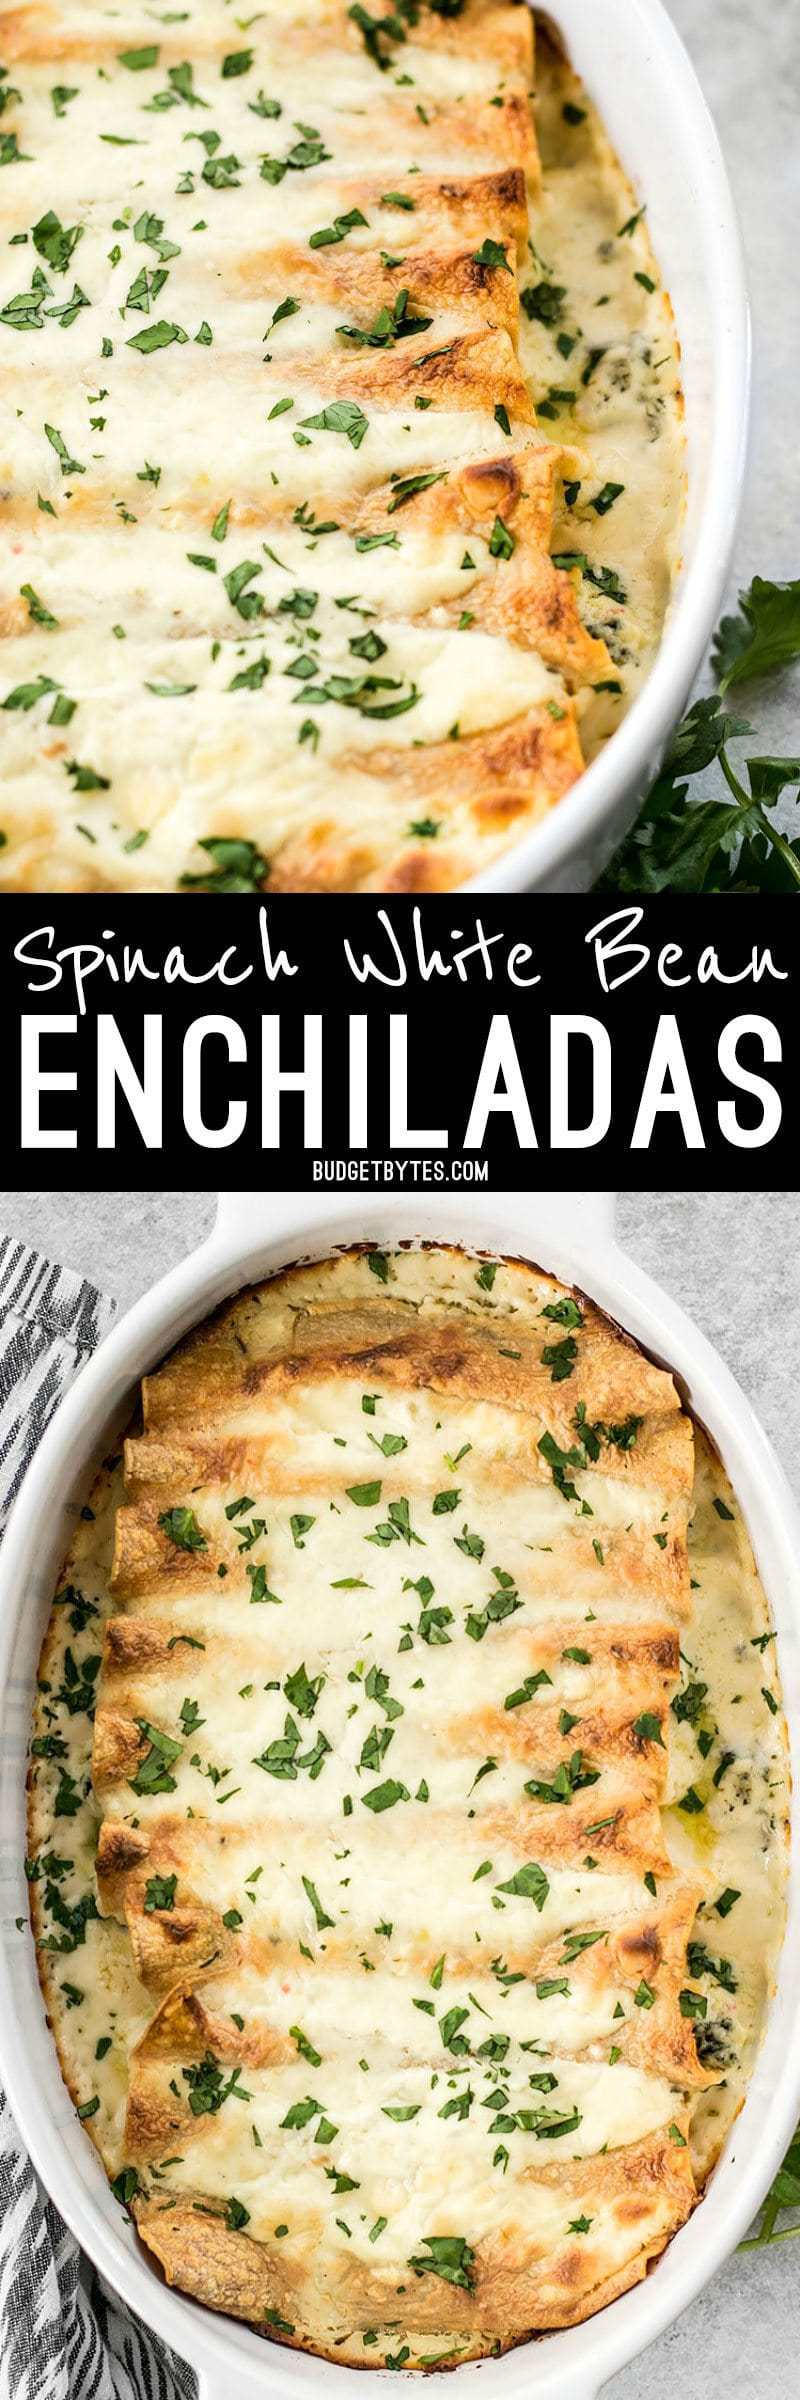 White beans make an inexpensive and fiber filled alternative to chicken in these creamy Spinach White Spinach White Bean Enchiladas. BudgetBytes.com